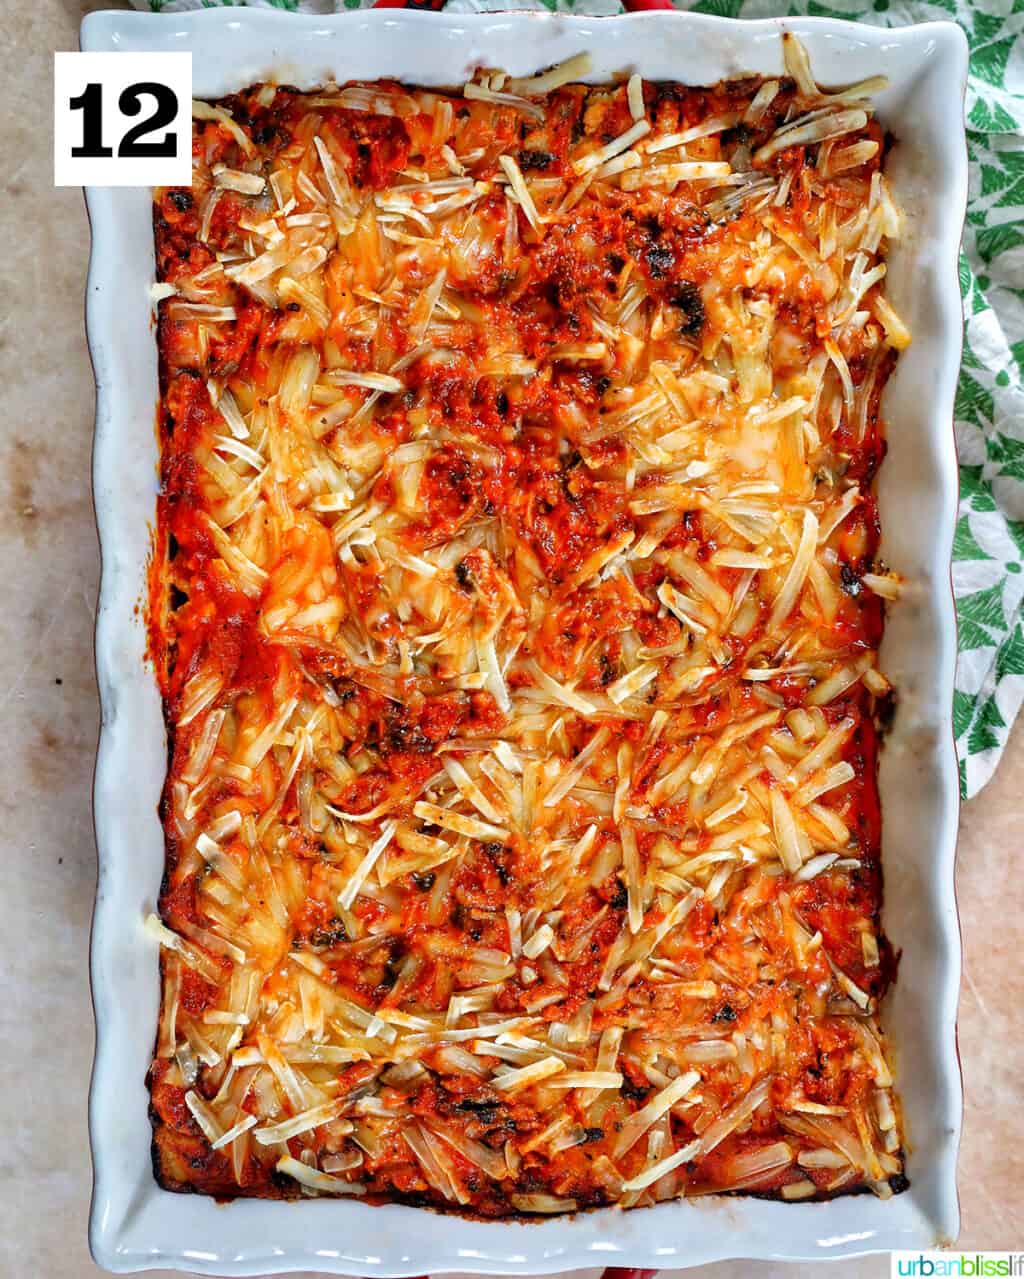 baking dish with baked dairy free lasagna inside topped with melty dairy free cheese.